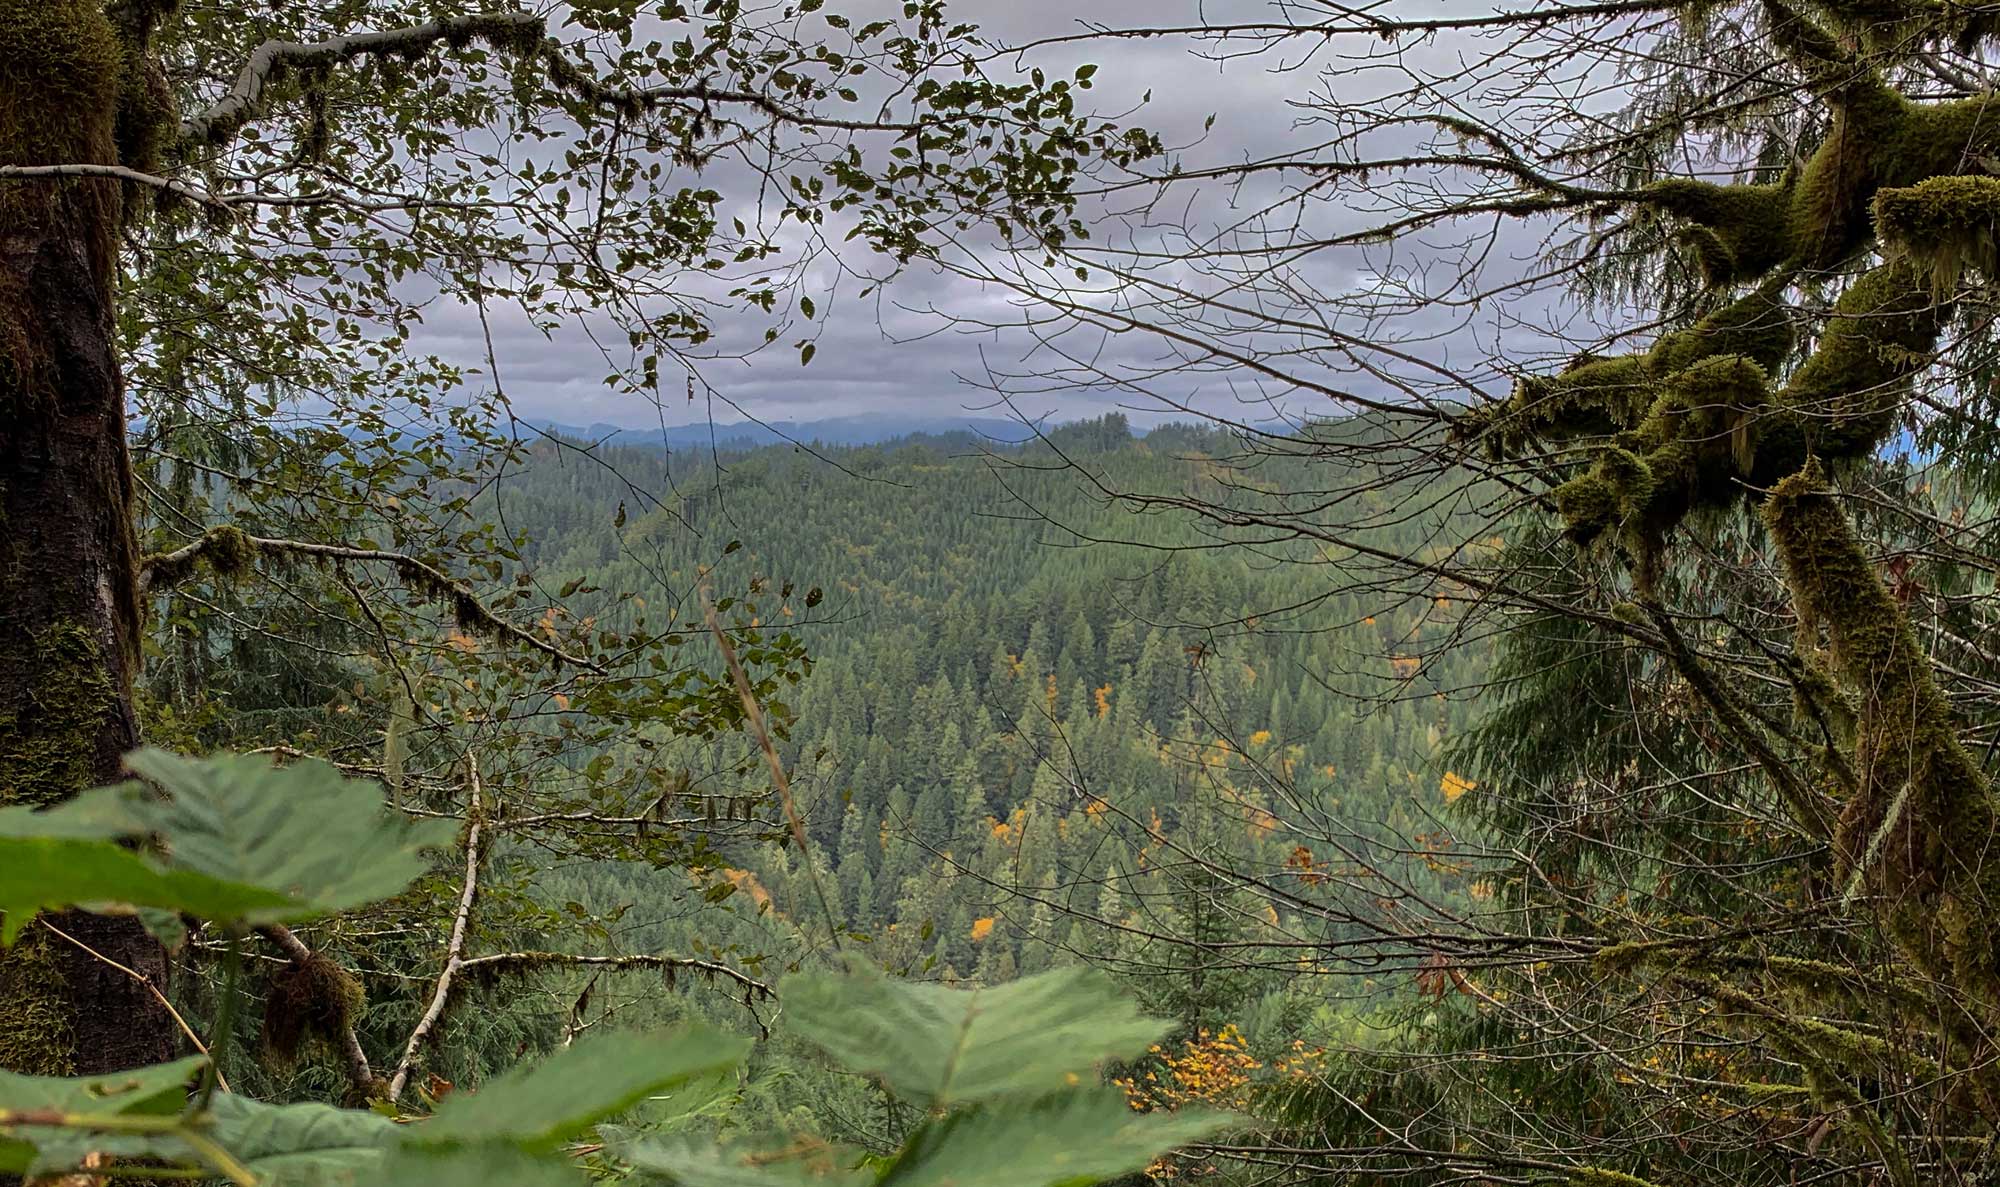 Photograph of the landscape in the Devil's Staircase Wilderness, Oregon. The photo shows a hilly landscape covered with conifers. The sky is overcast. In the foreground, branches are covered in moss.